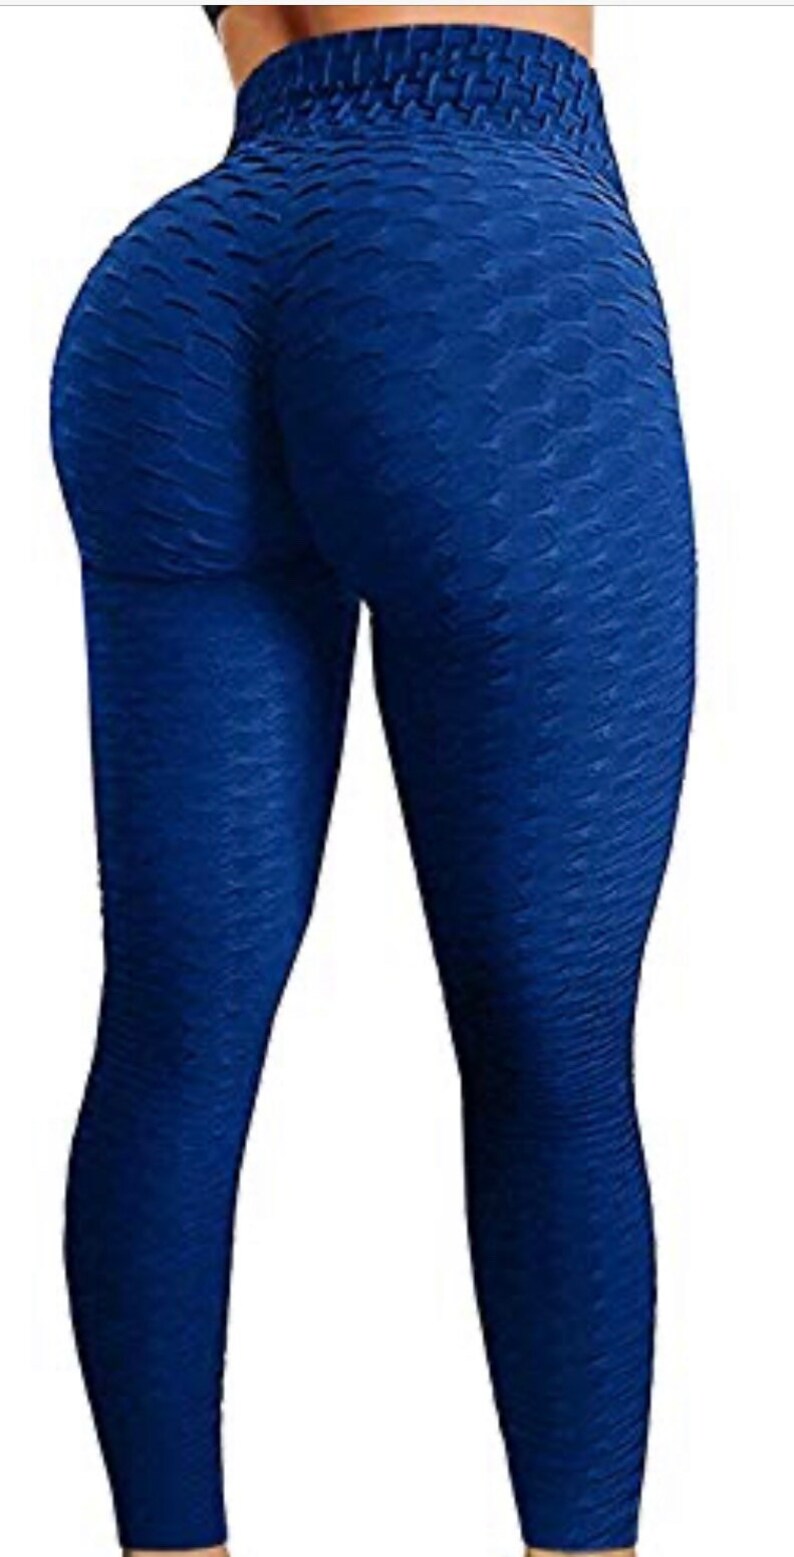 Fitness Scrunch Butt Lifting Compression Yoga Workout Leggings - Etsy